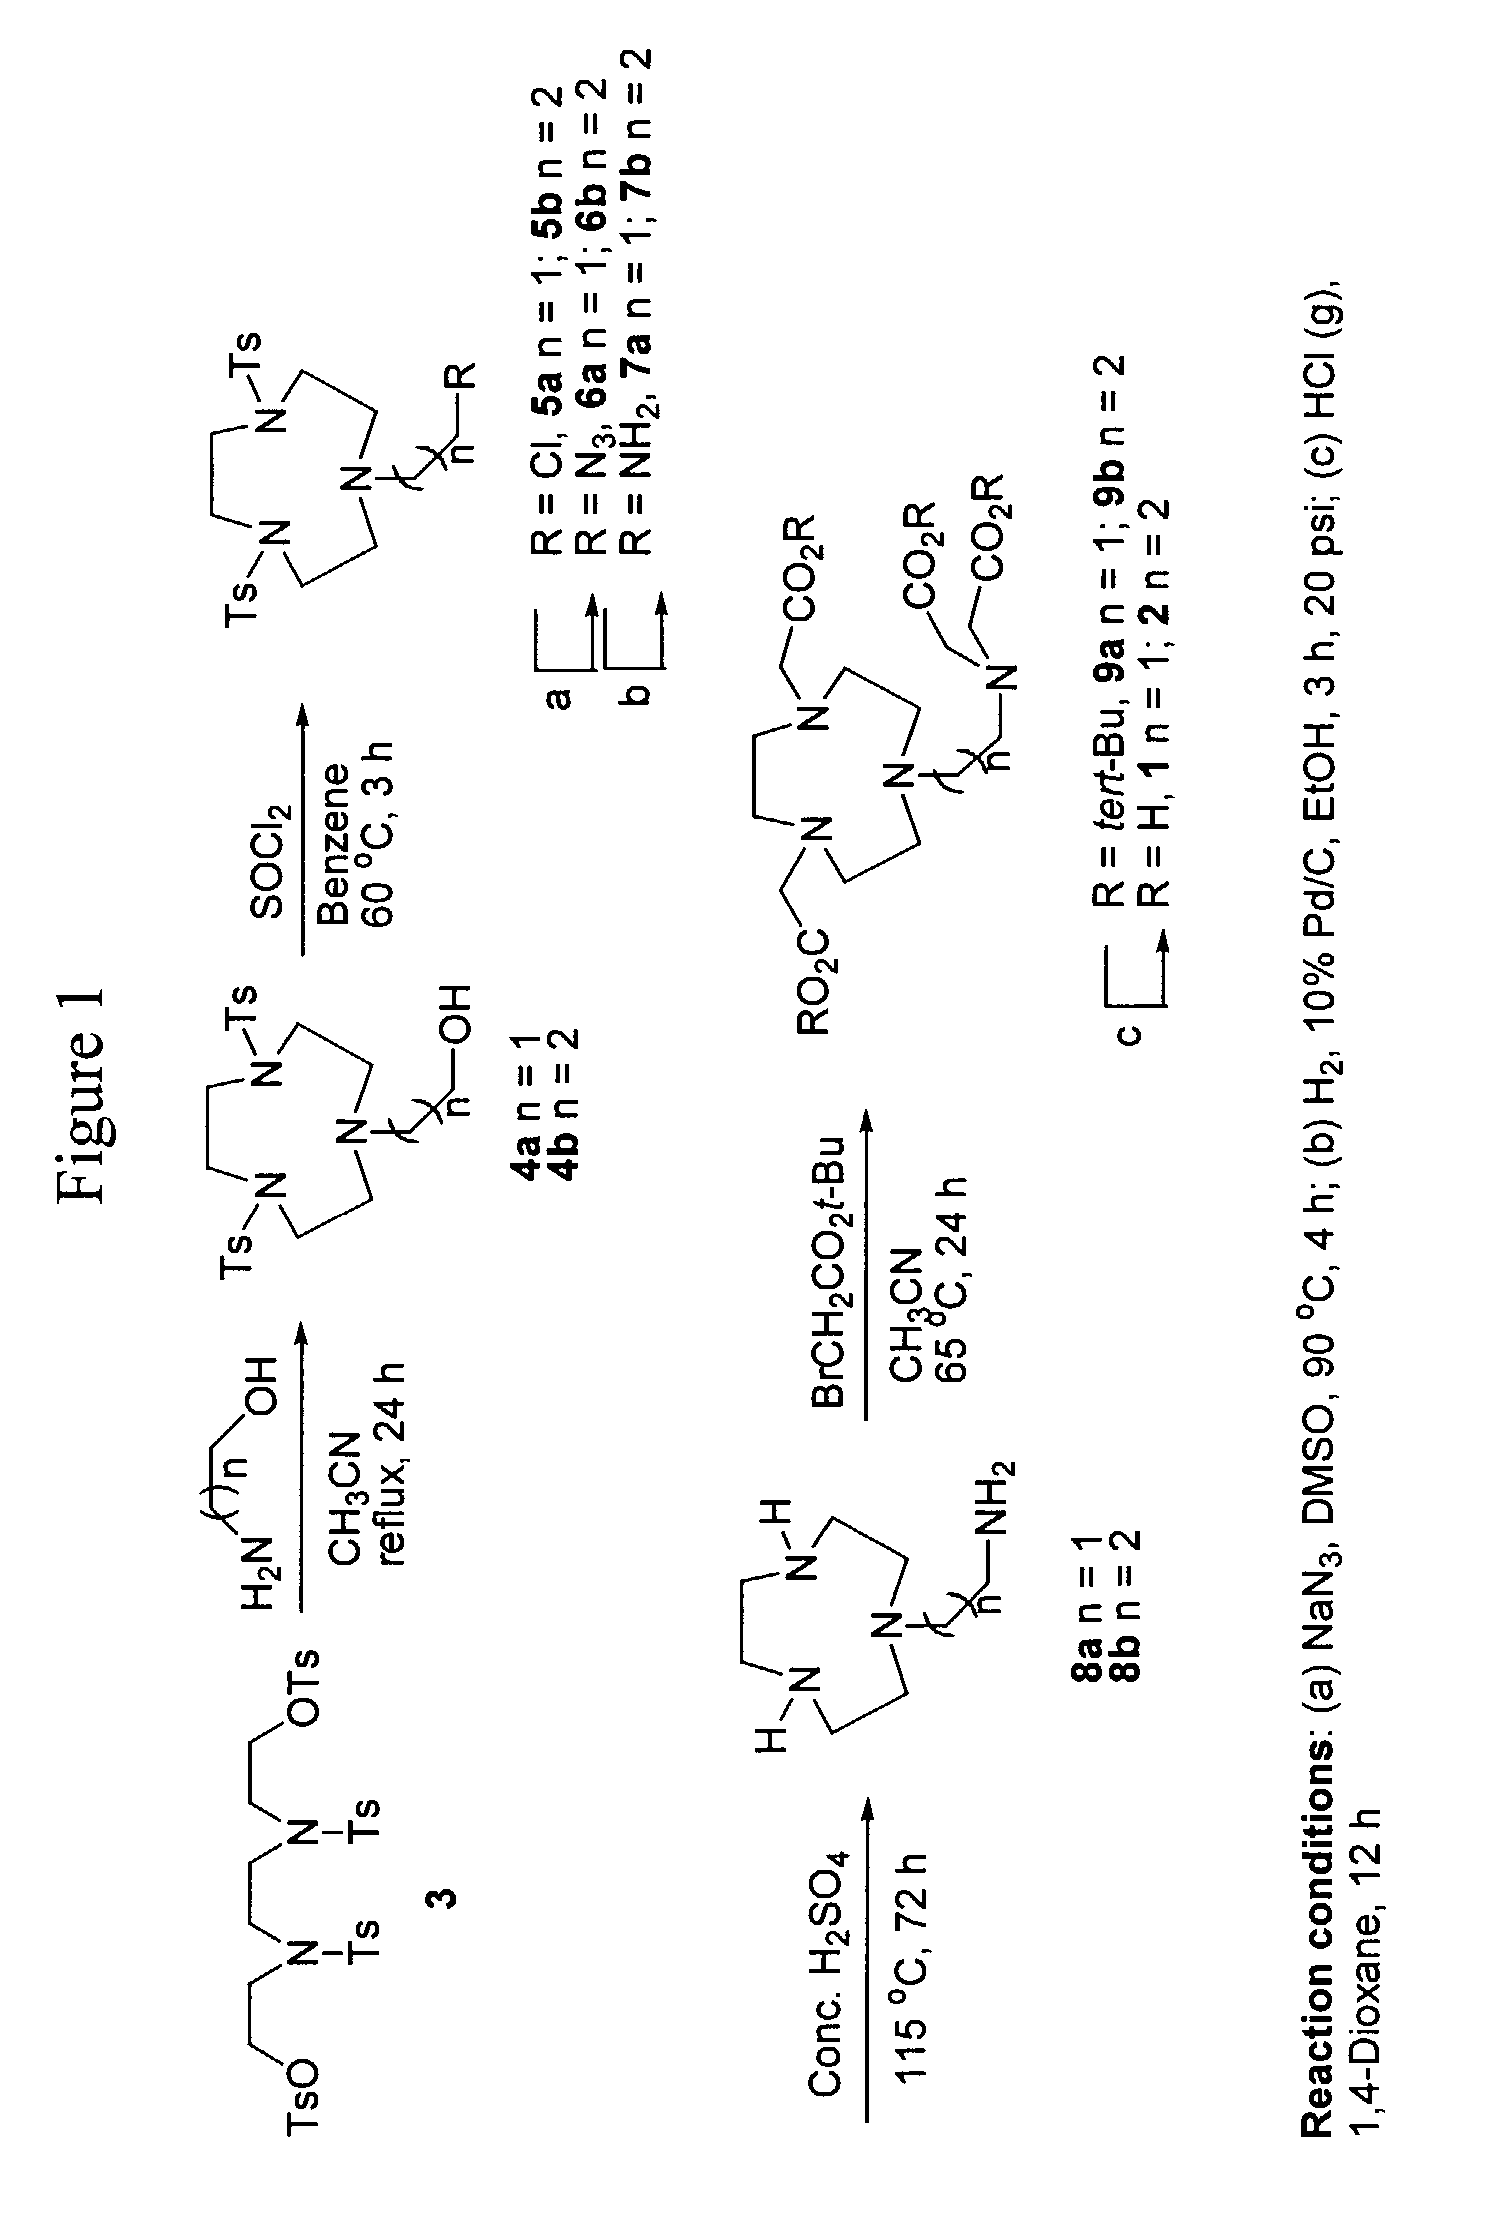 Scorpionate-like pendant macrocyclic ligands, complexes and compositions thereof, and methods of using same